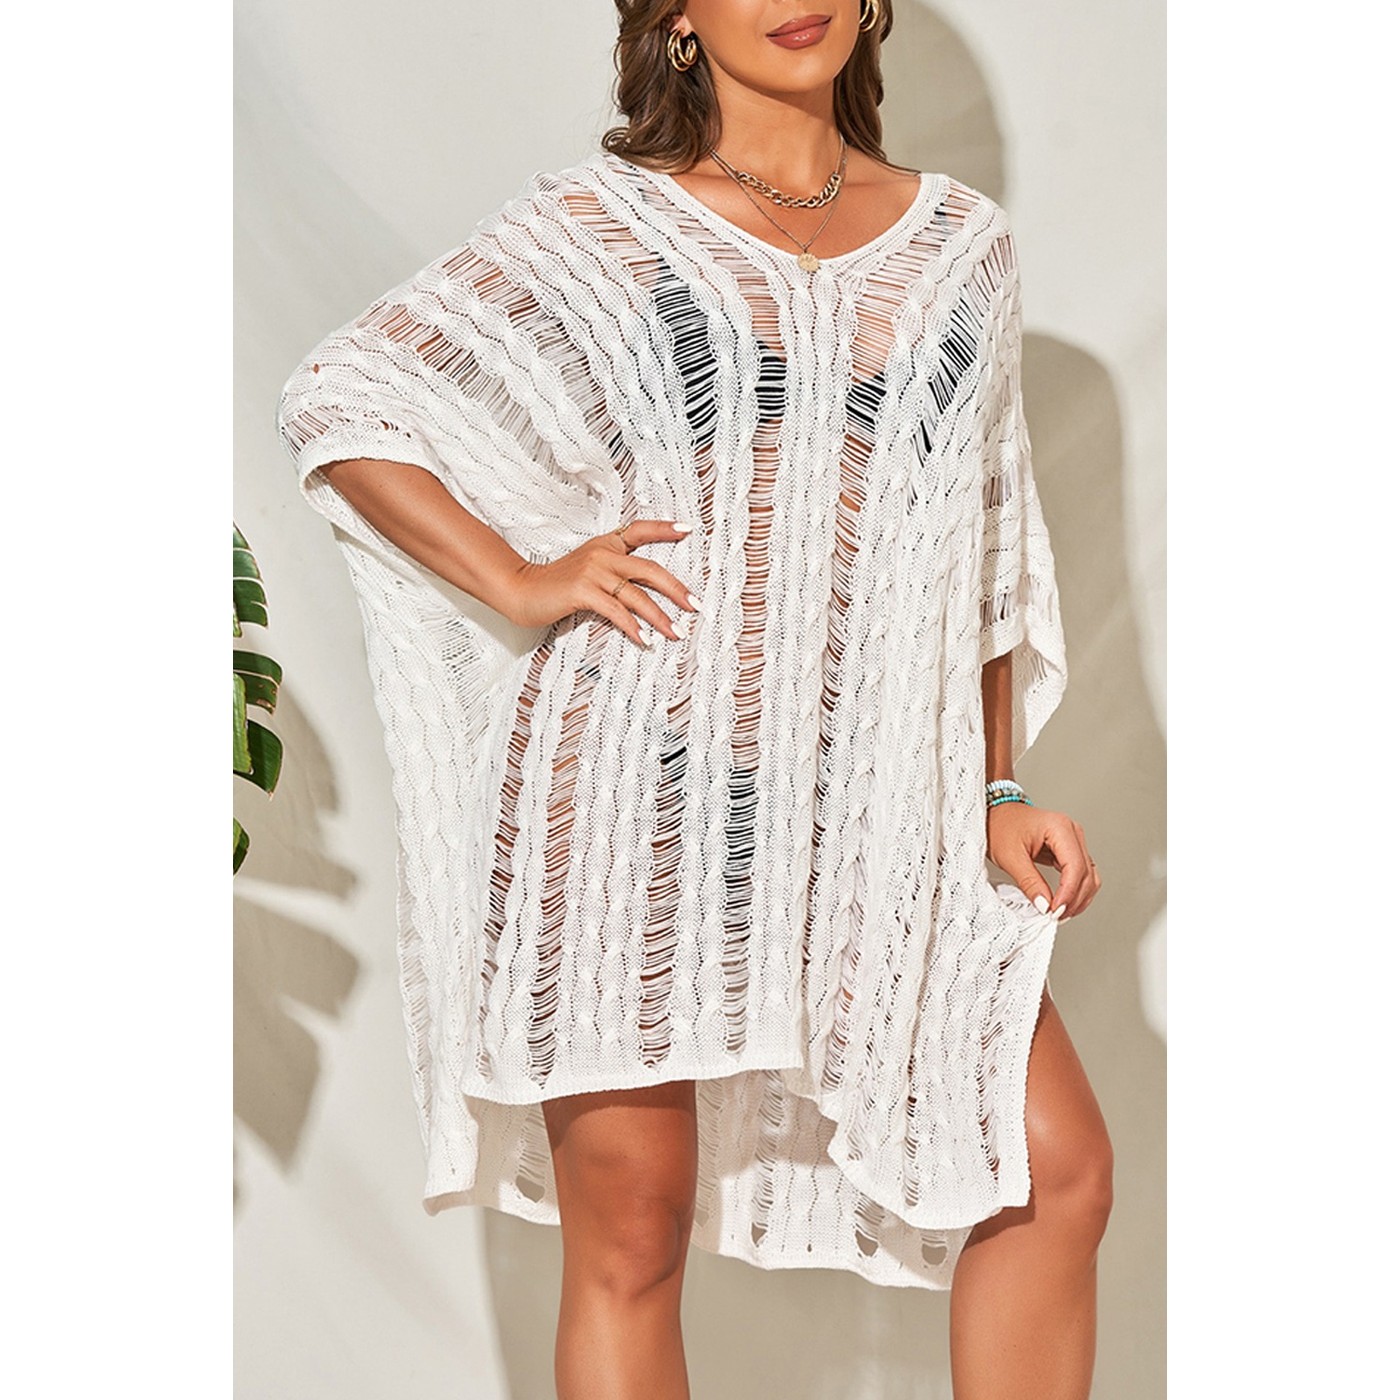 White Knitted Beach Cover-Up